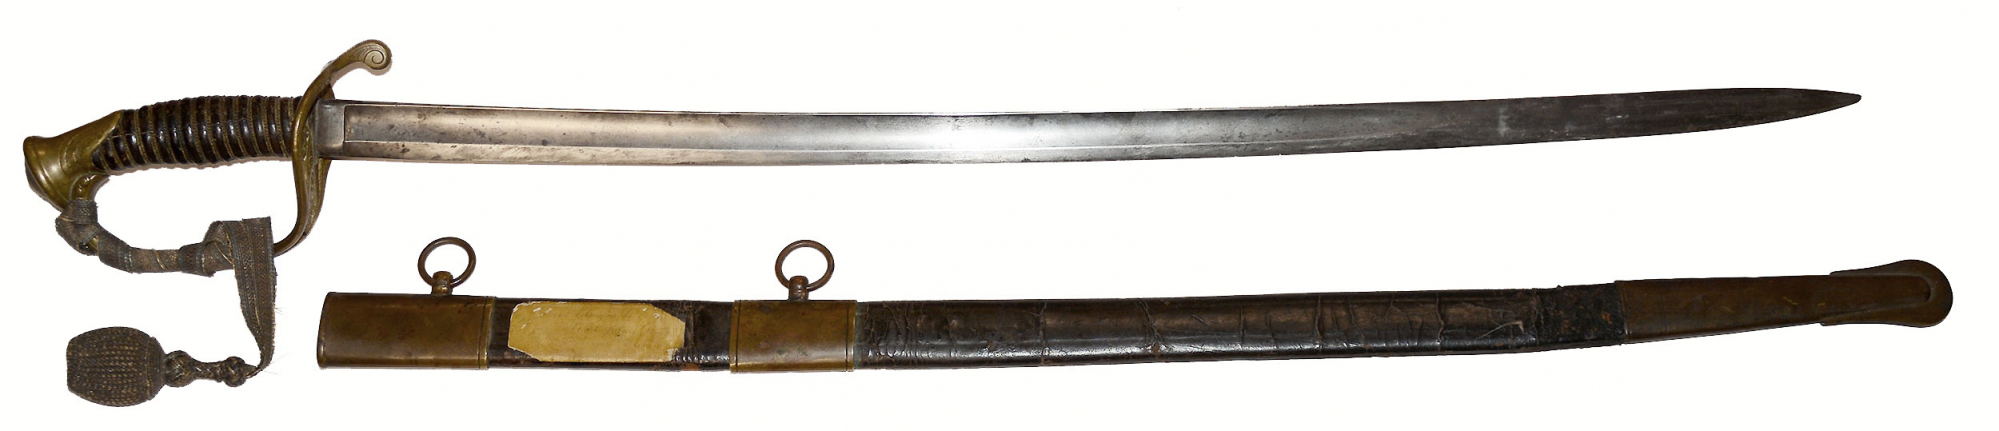 M1850 FOOT OFFICER’S SWORD OF JULIUS ELLENDORF, 42nd NEW YORK: THE TAMMANY REGIMENT – LIEUTENANT, ADJUTANT, AND CAPTAIN: WIA COLD HARBOR – BREVETED  “FOR FAITHFUL AND MERITORIOUS SERVICE IN THE FIELD DURING THE WAR.”